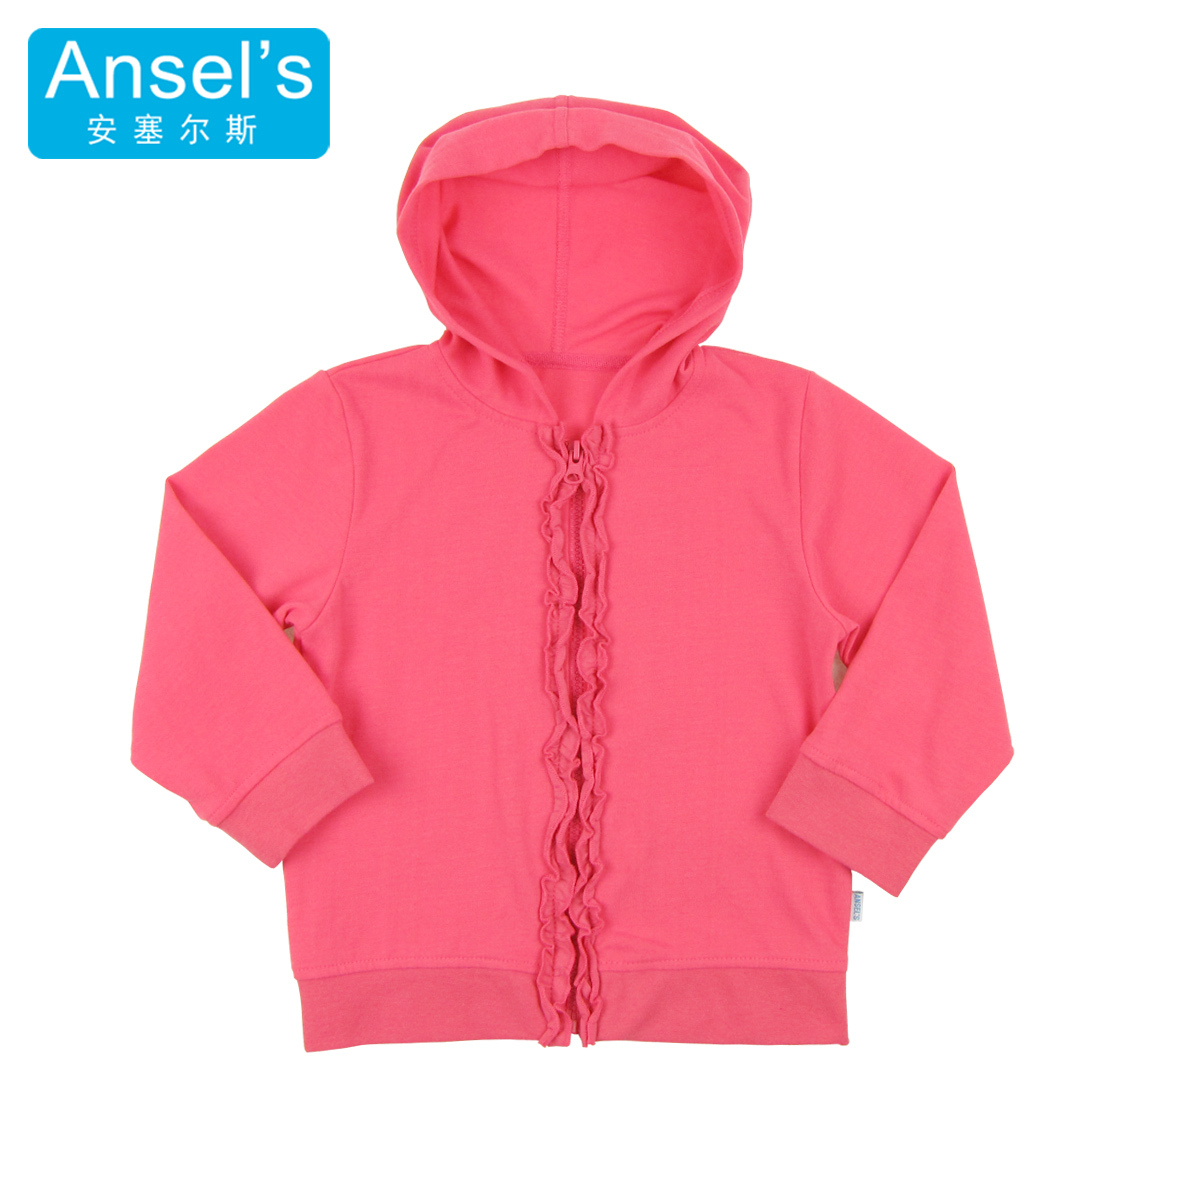 Baby outerwear with a hood children's clothing female child baby clothes spring and autumn sweatshirt top